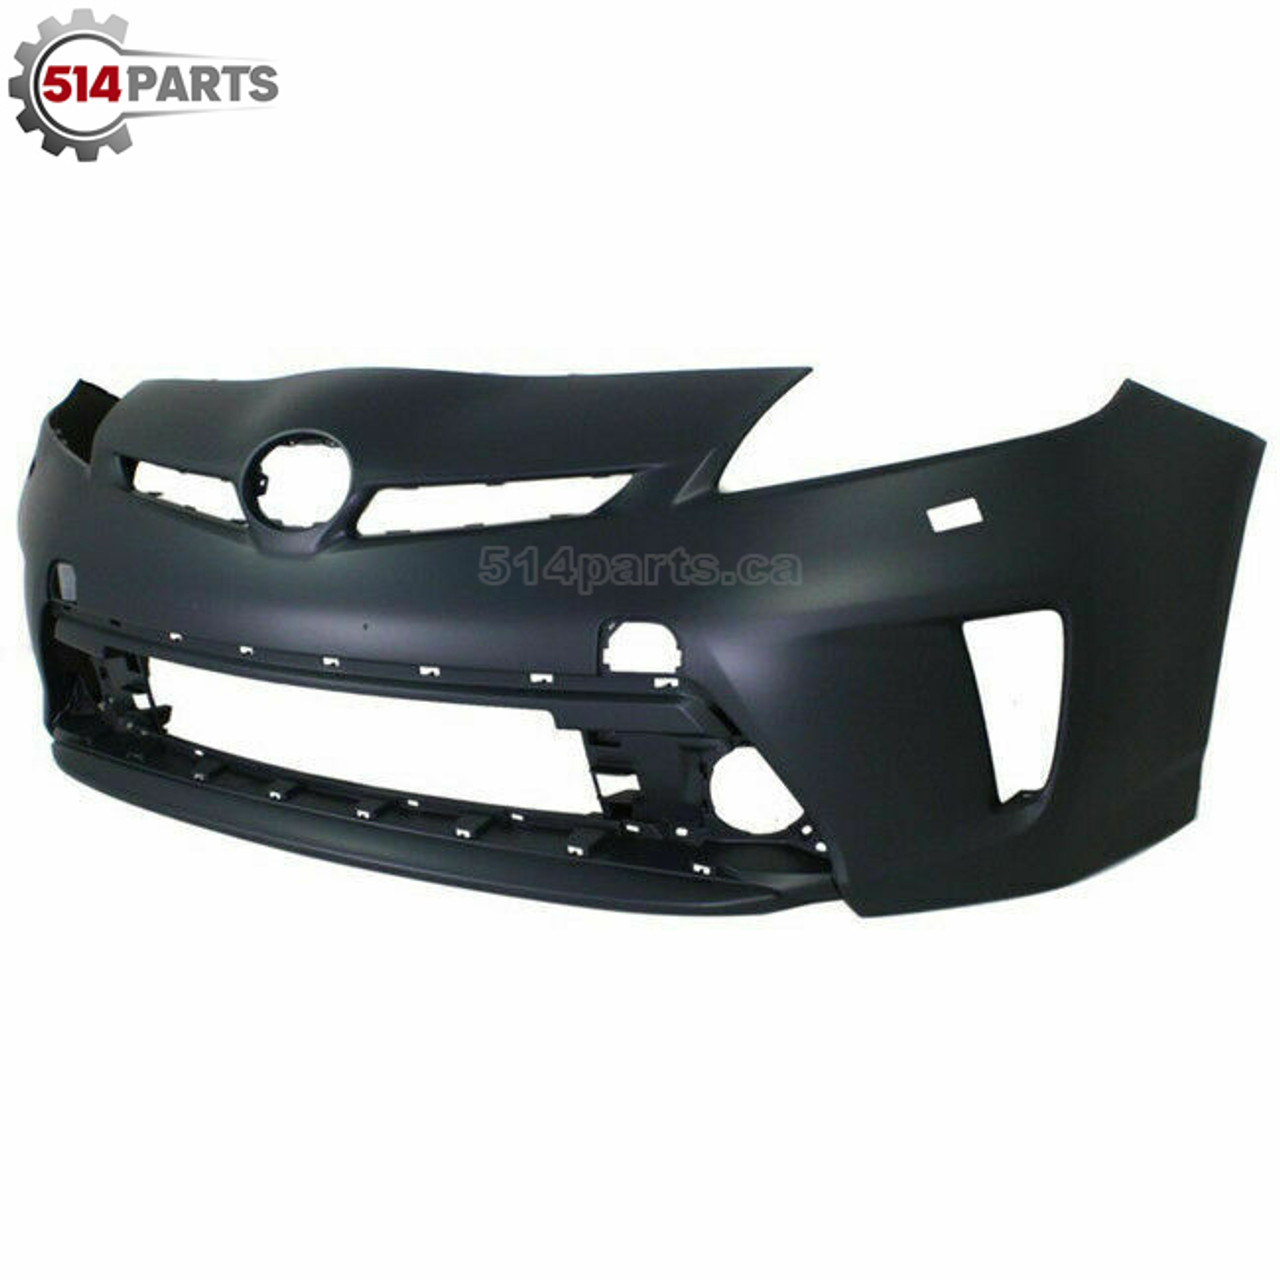 2012 - 2015 TOYOTA PRIUS and PRIUS PLUG-IN FRONT BUMPER COVER with HEADLIGHT WASHER HOLES - PARE-CHOCS AVANT avec TROUS DE LAVE-PHARE